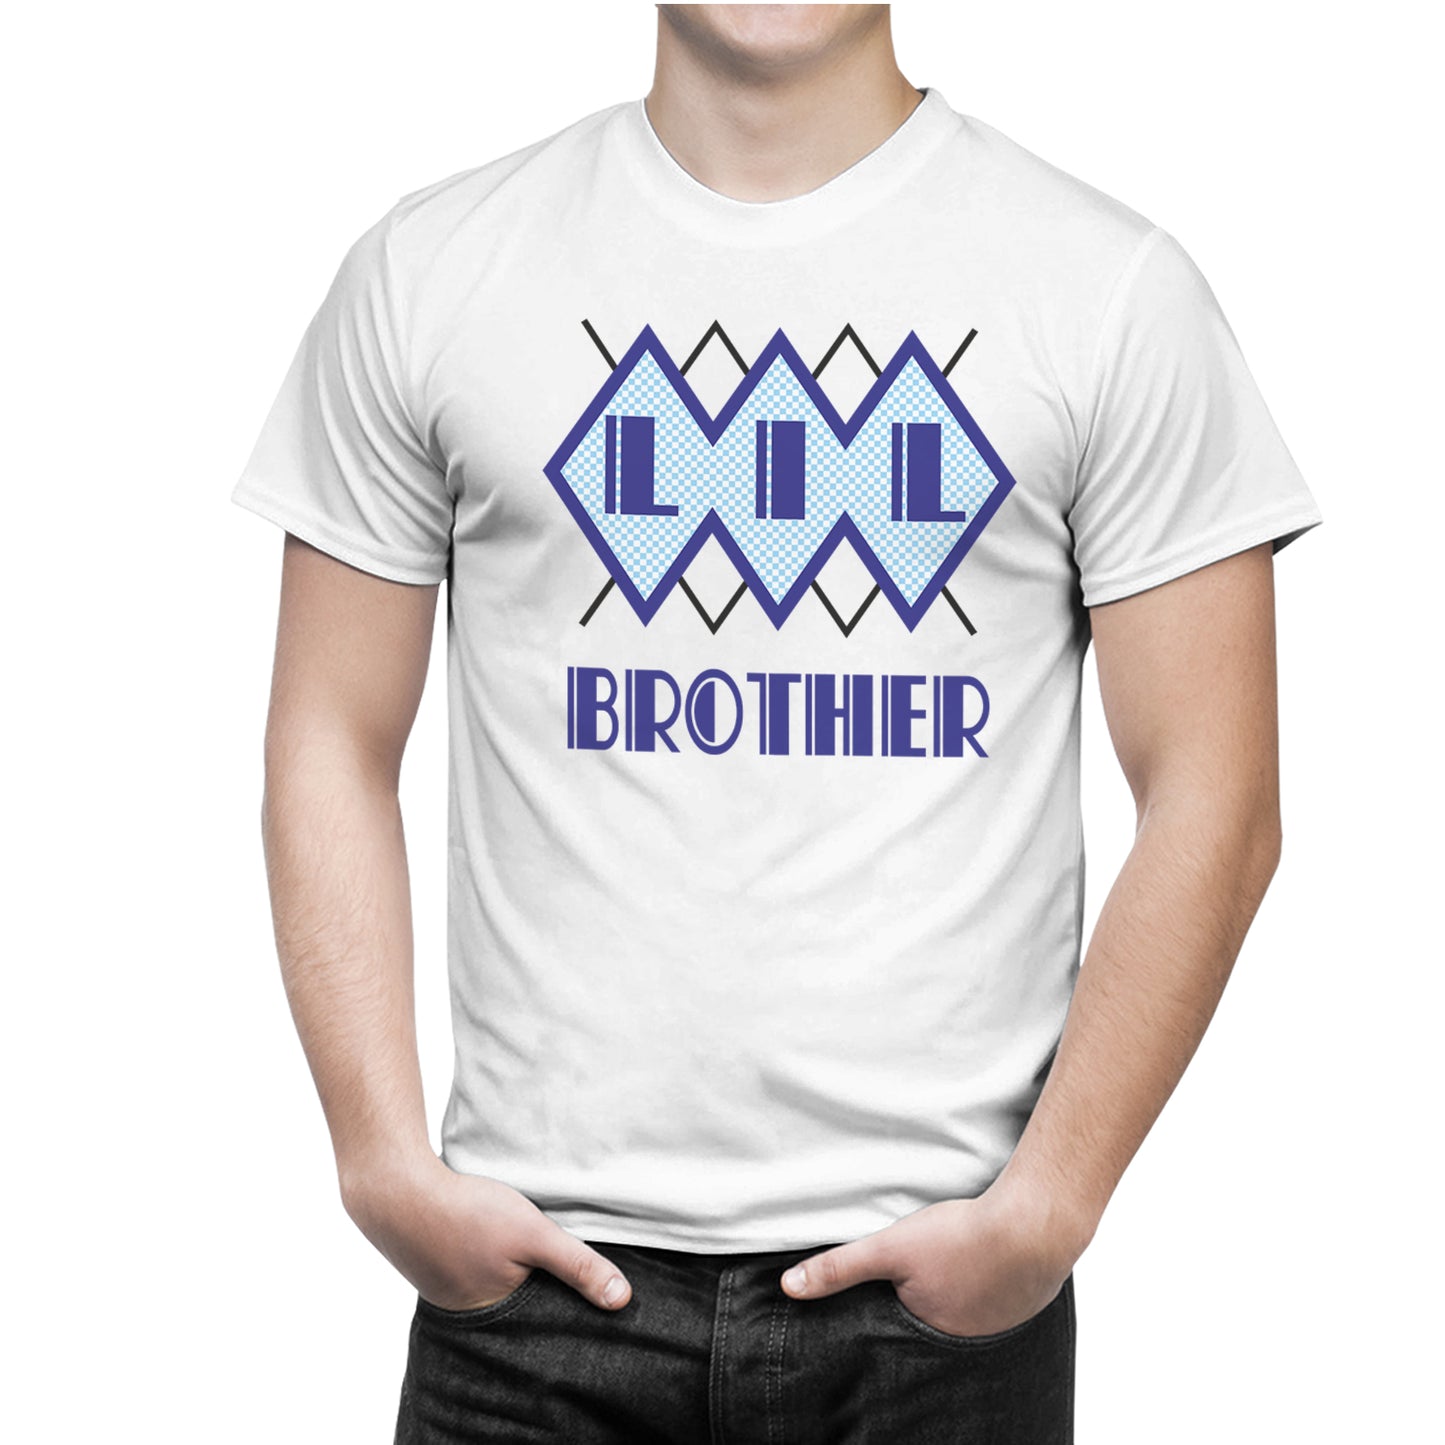 Lil brother- Big sister matching Sibling t shirts - white